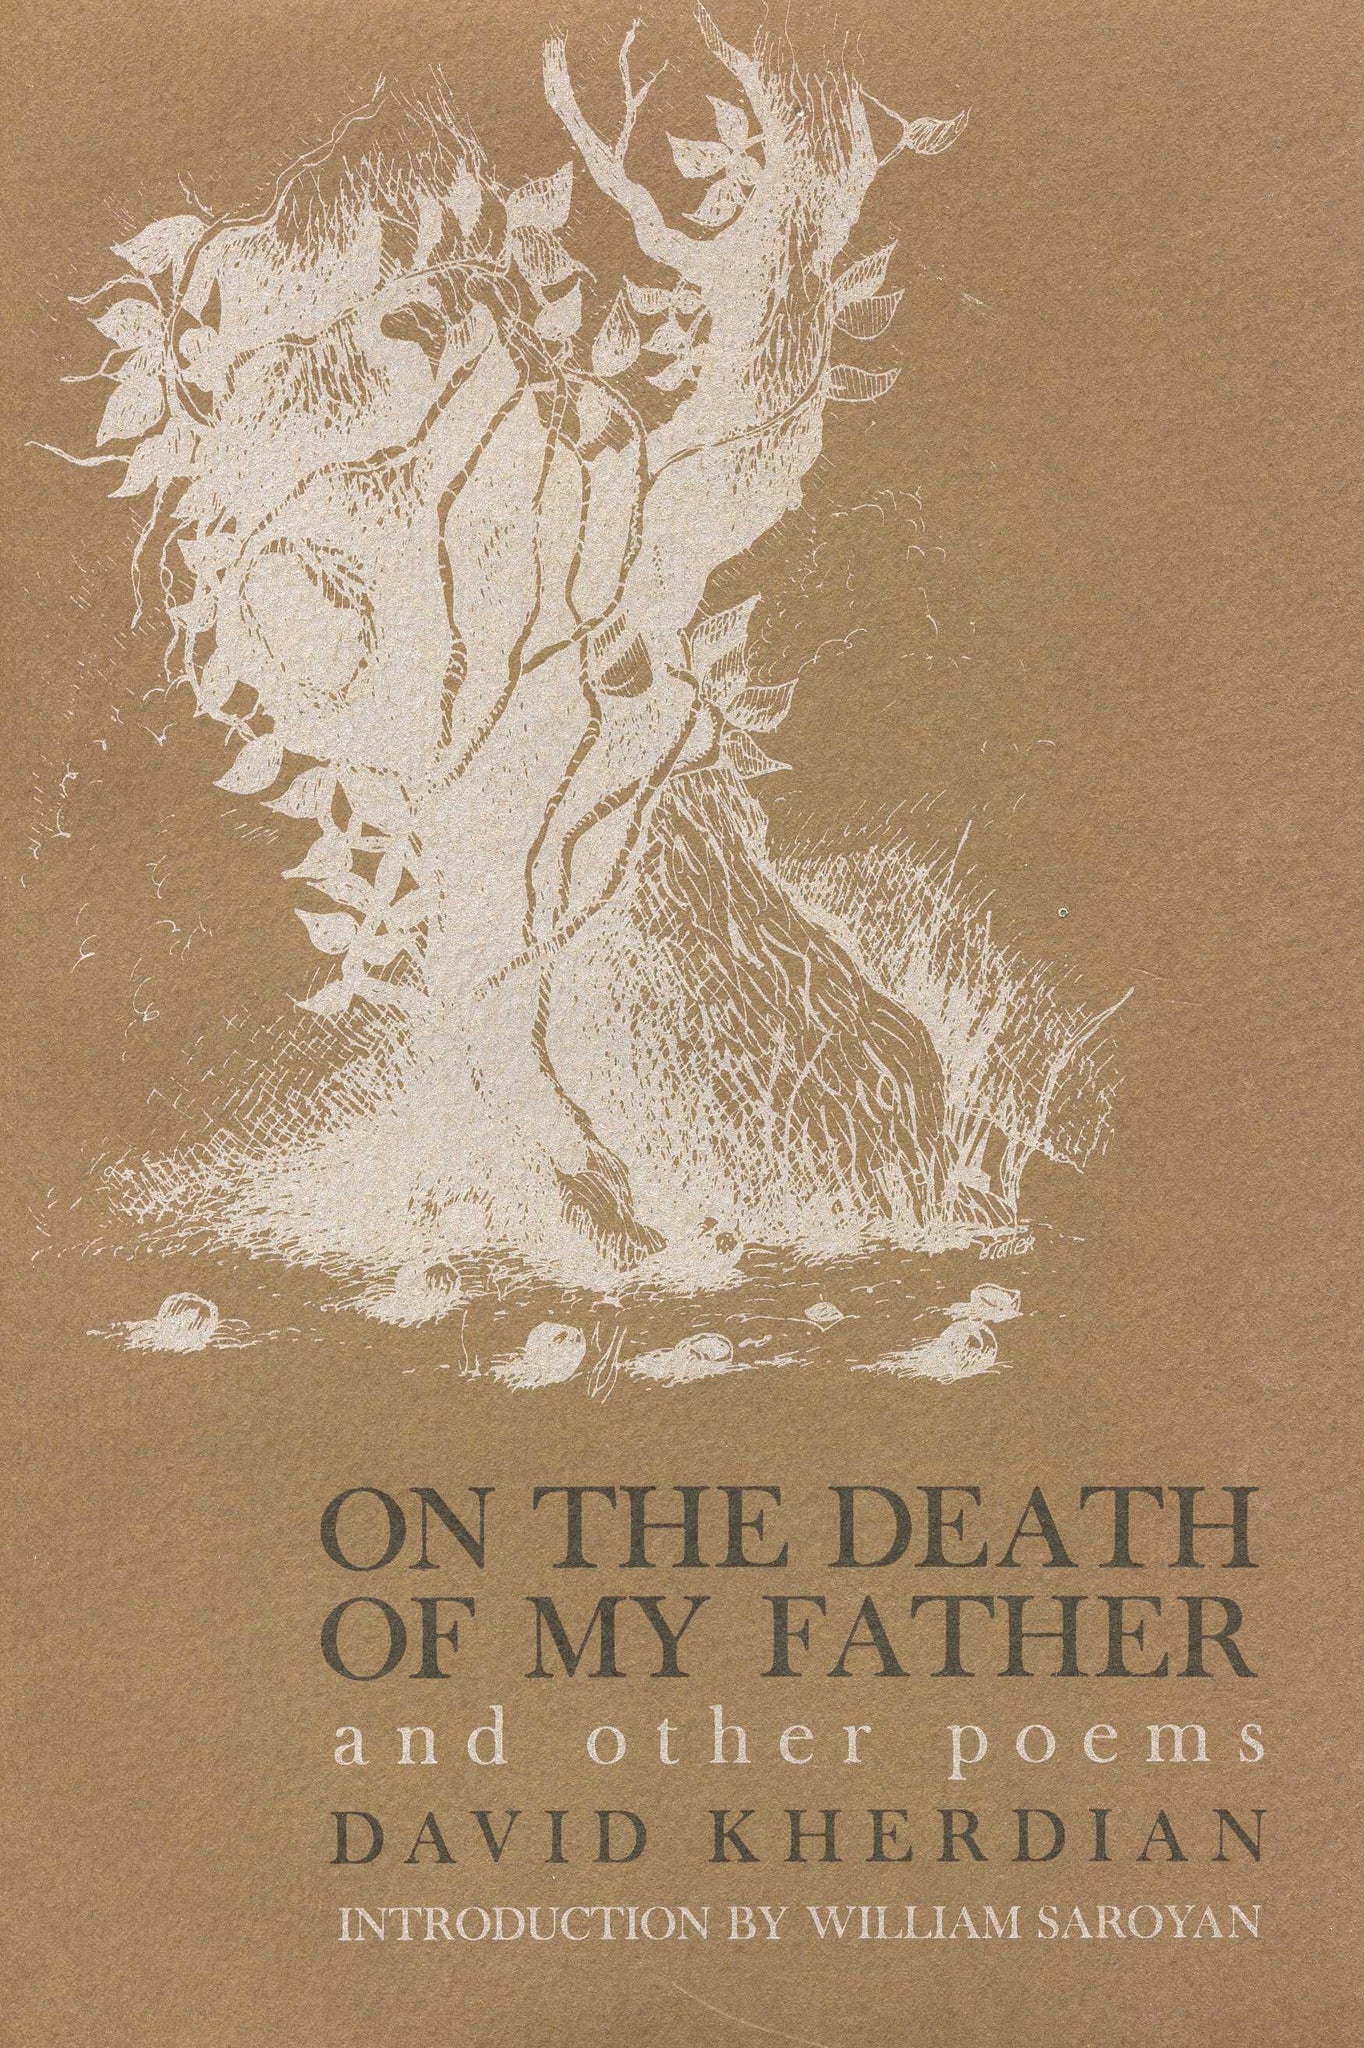 ON THE DEATH OF MY FATHER AND OTHER POEMS